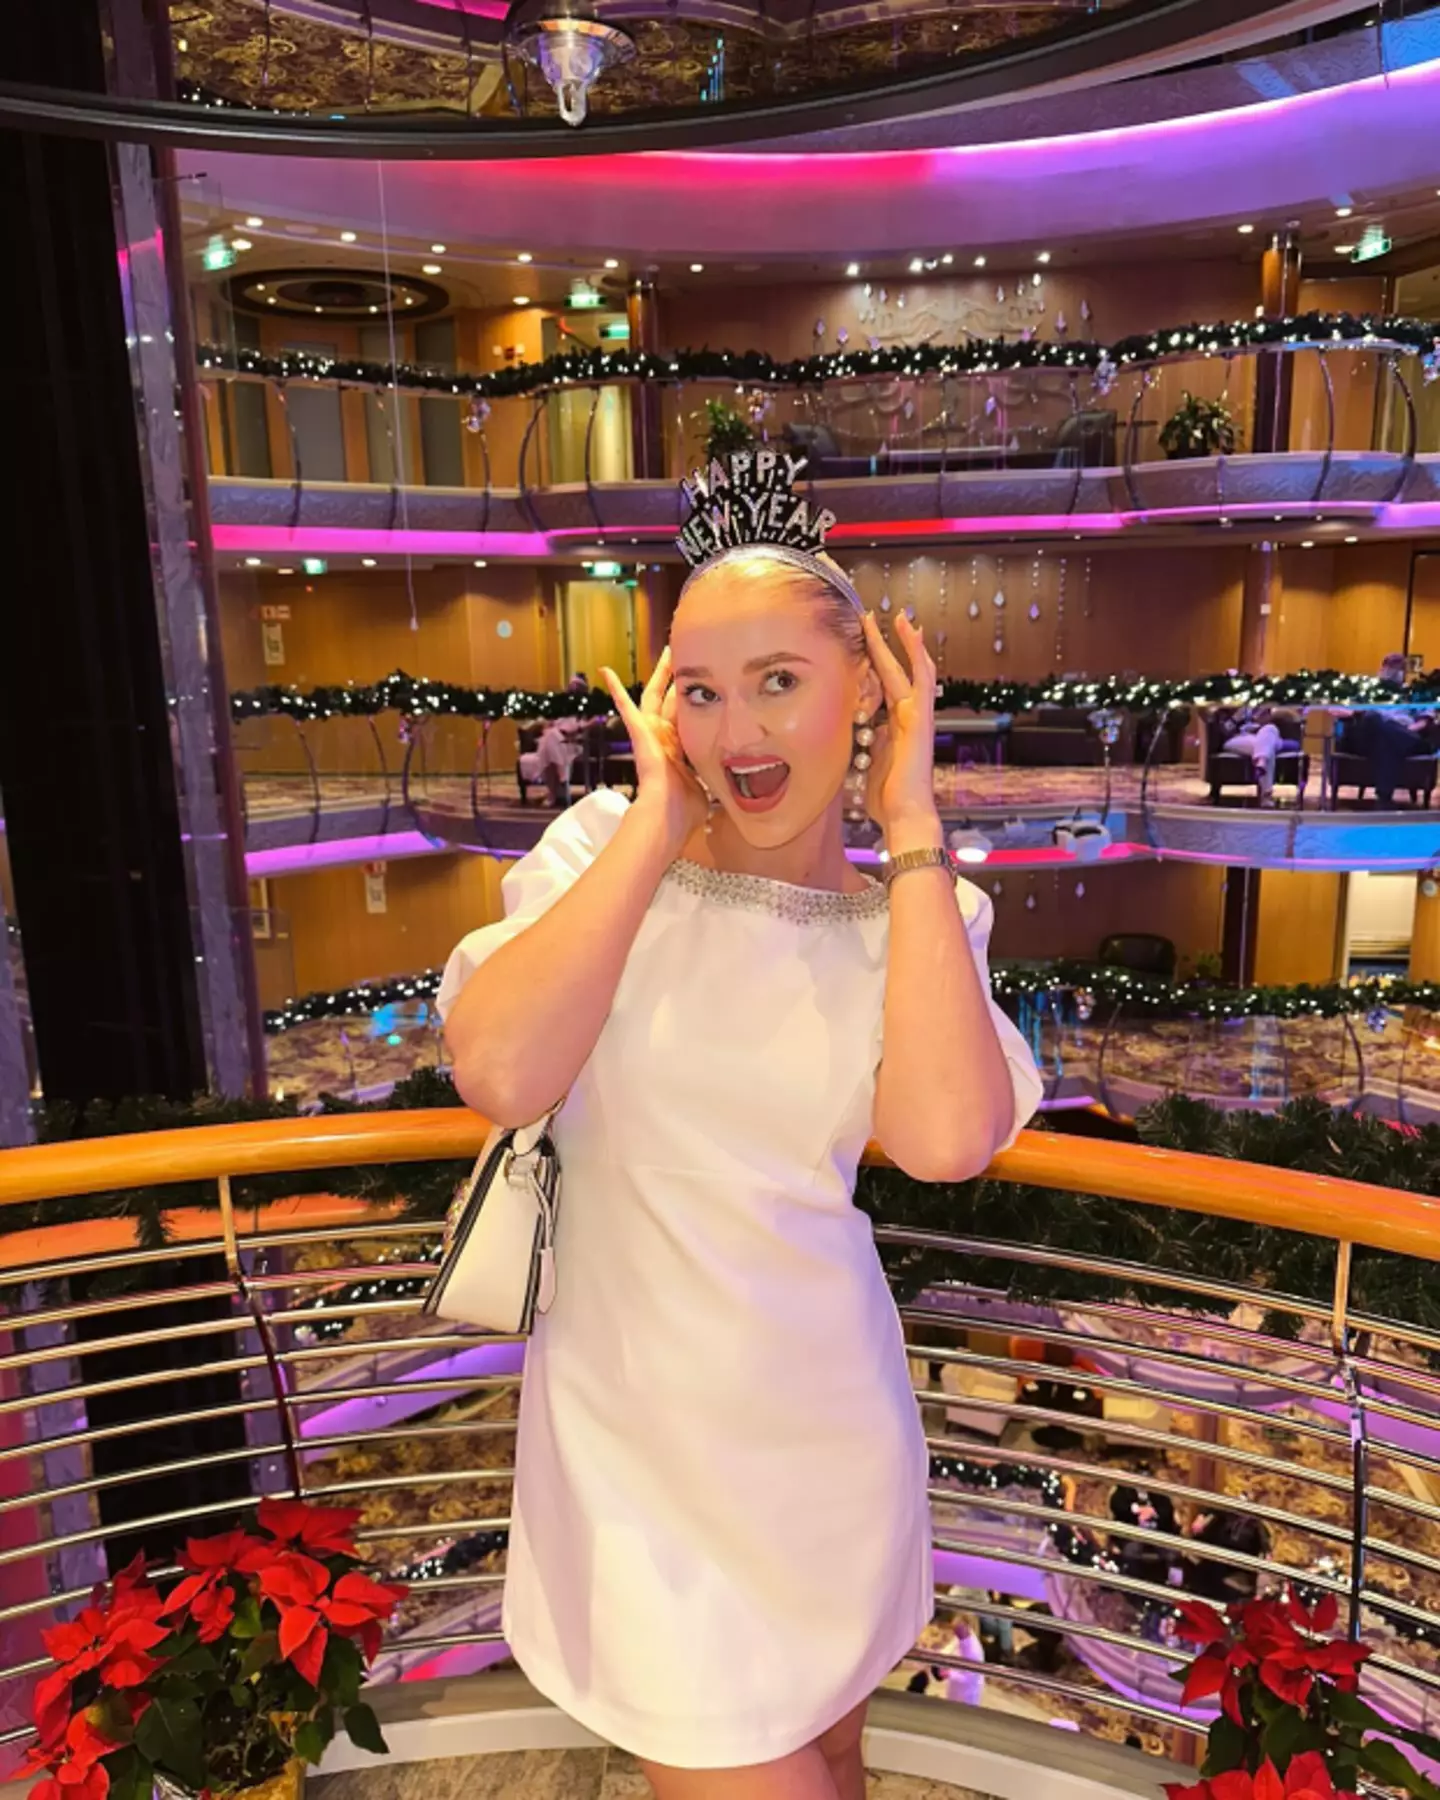 Content creator Amike Oosthuizen is travelling around the globe on the world’s longest cruise.